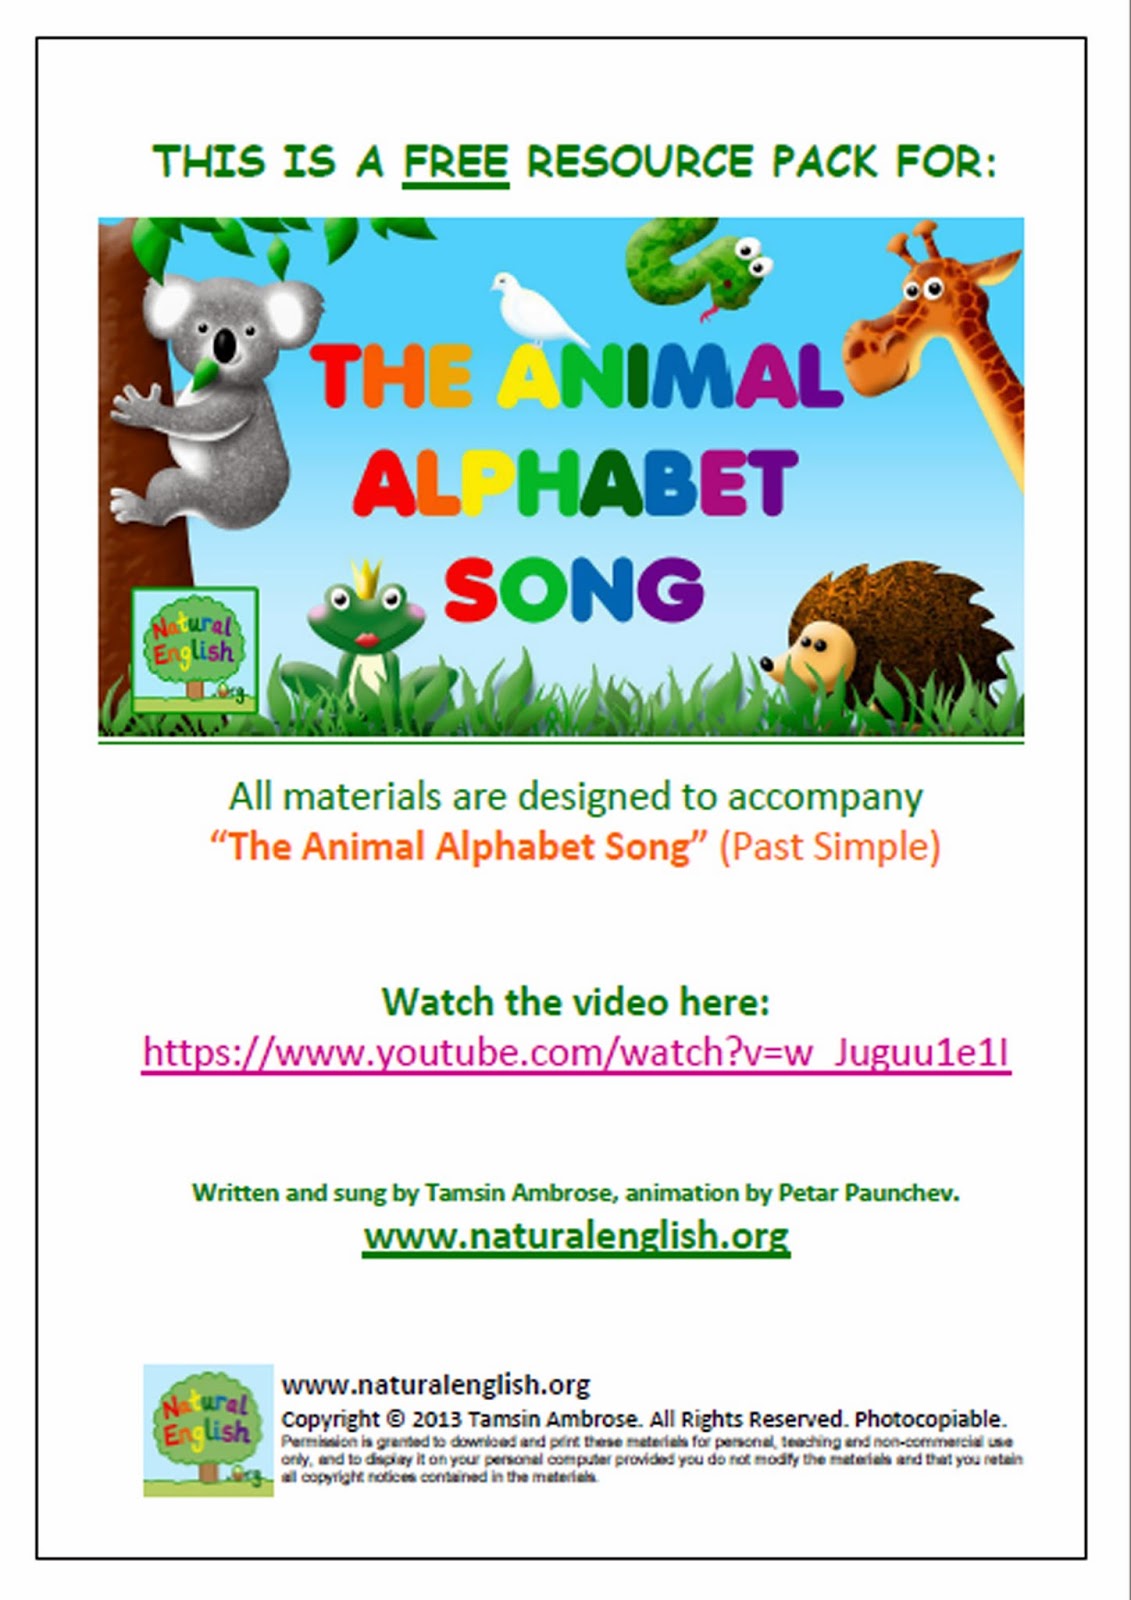 : The Animal Alphabet Song is now online!